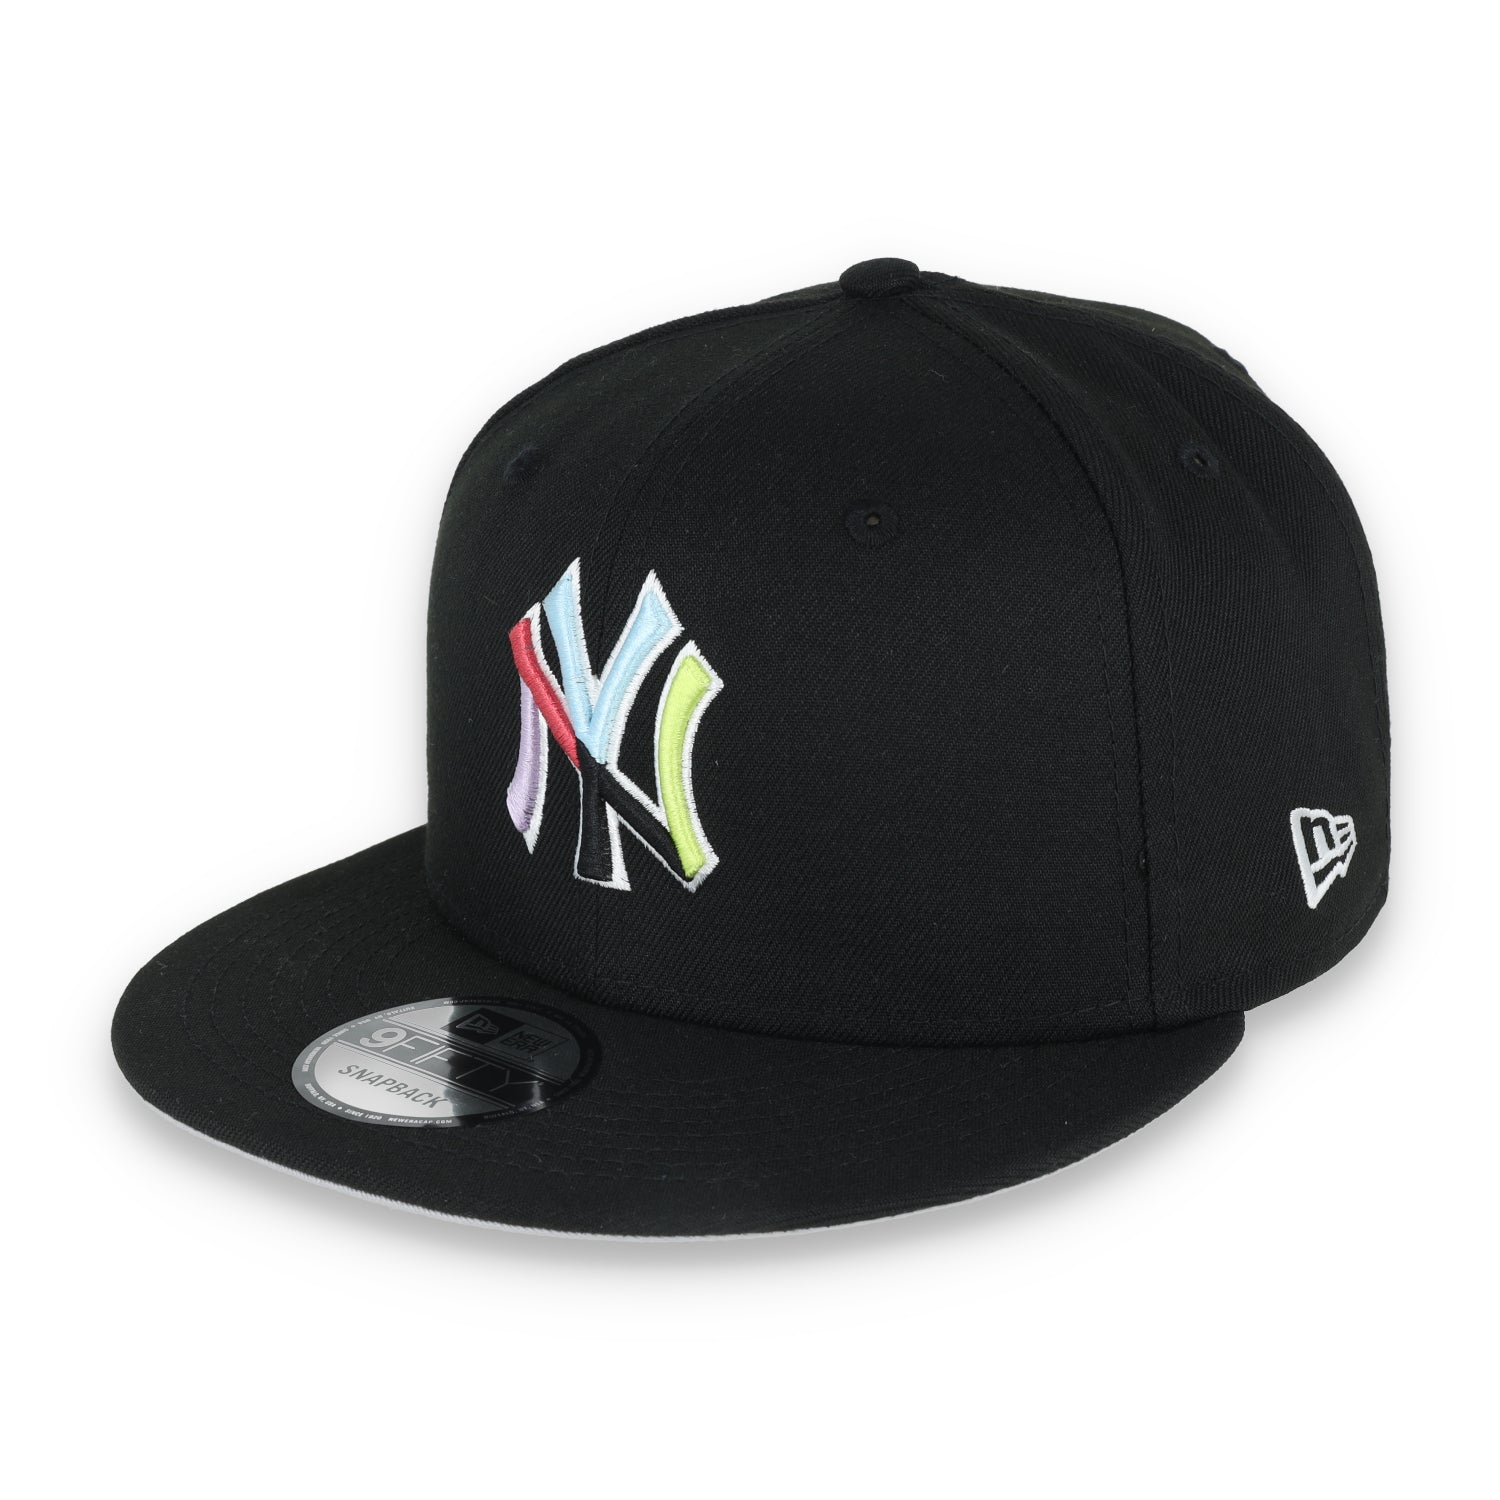 New York Yankees Multi Color Pack 9FIFTY Snapback Hat-Black